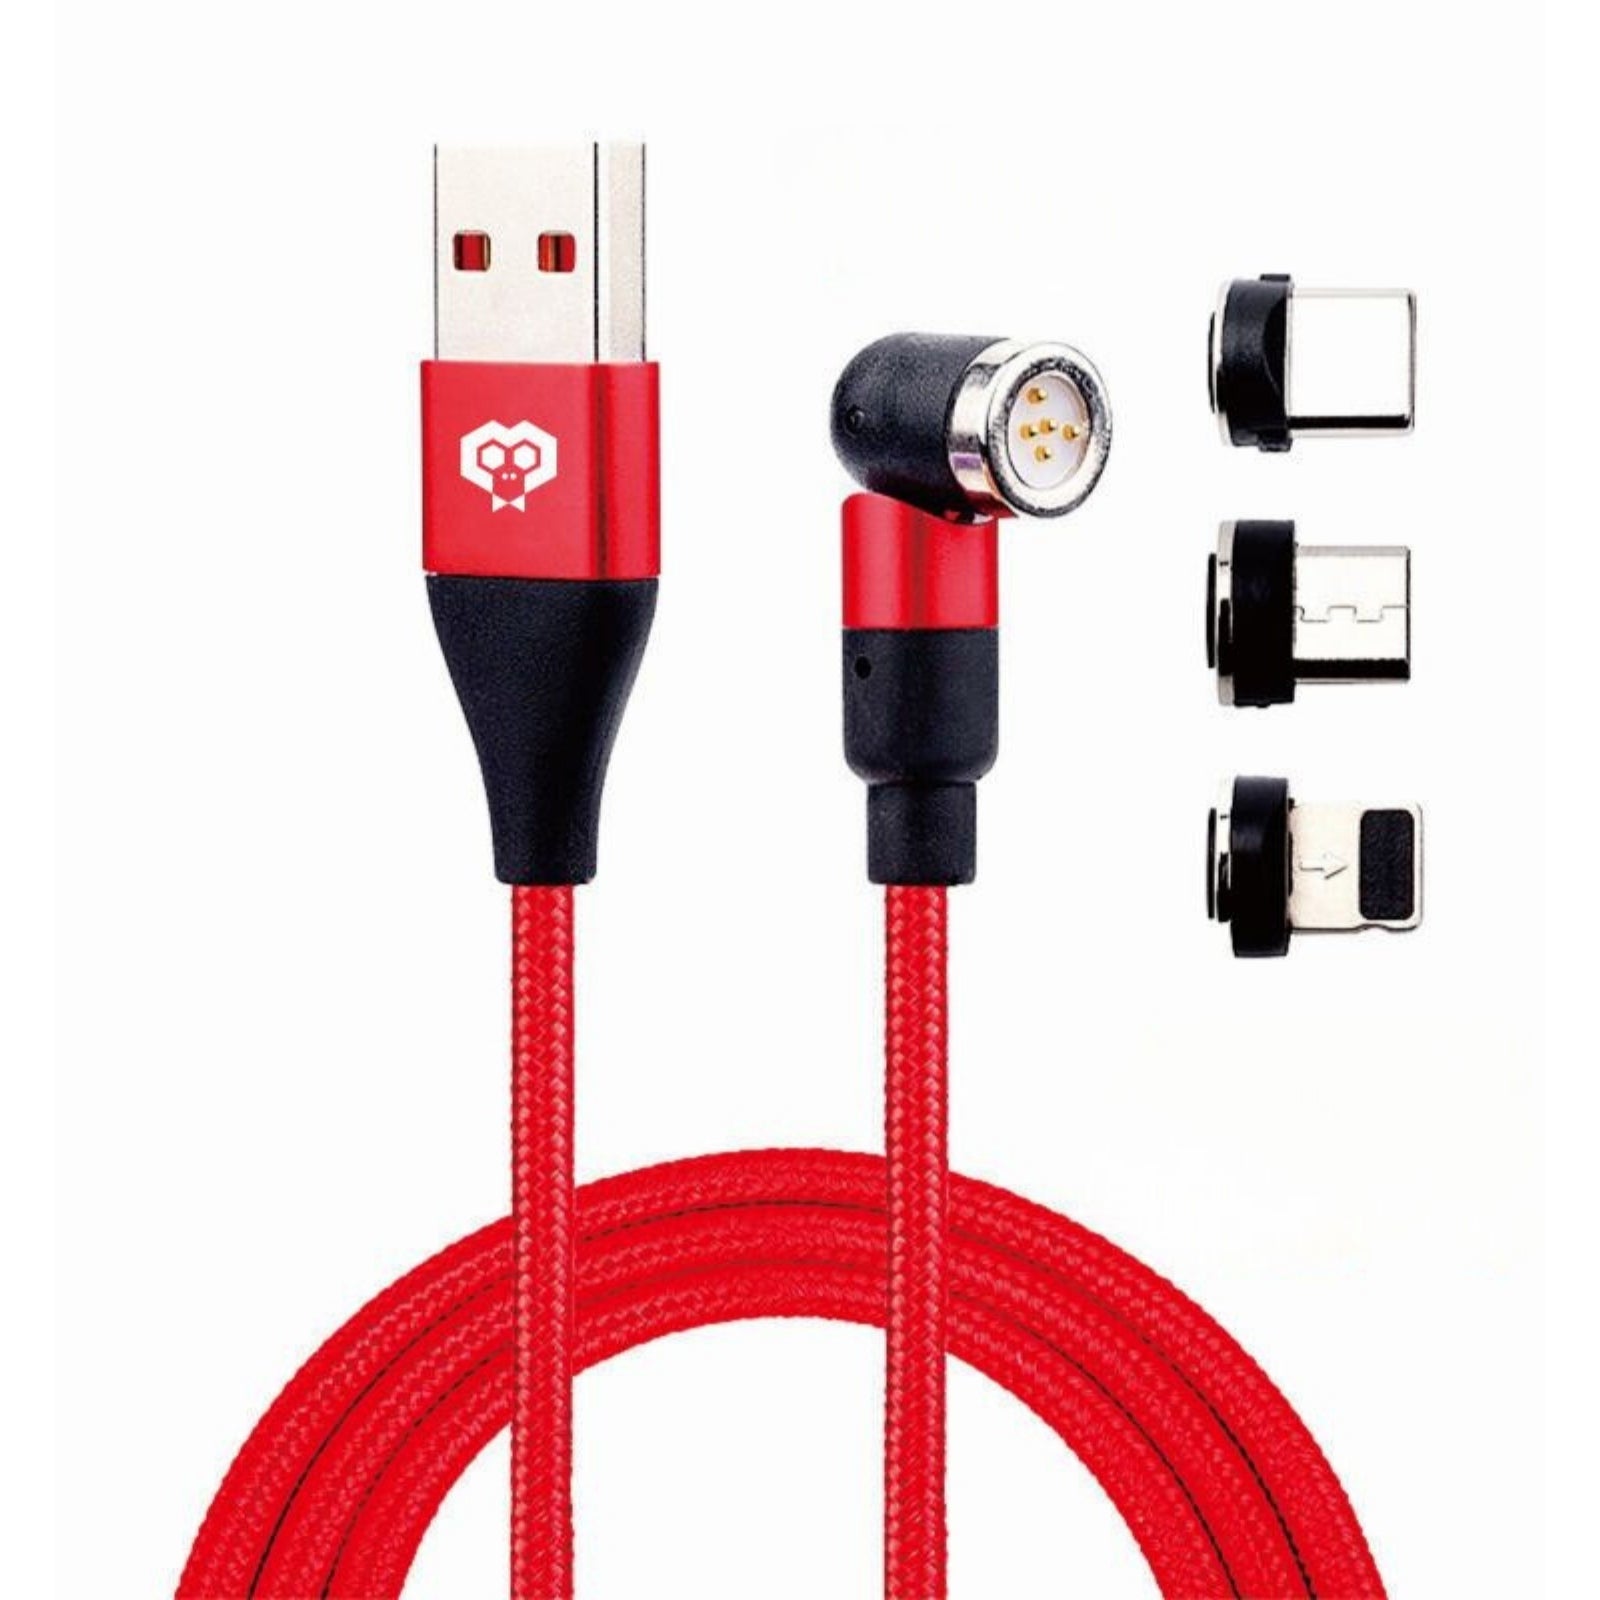 MonkeyTEC 3 in 1 magnetic charging cable with data transfer 540° rotatable for iPhone / Micro USB / USB C PC-MGT-PD3